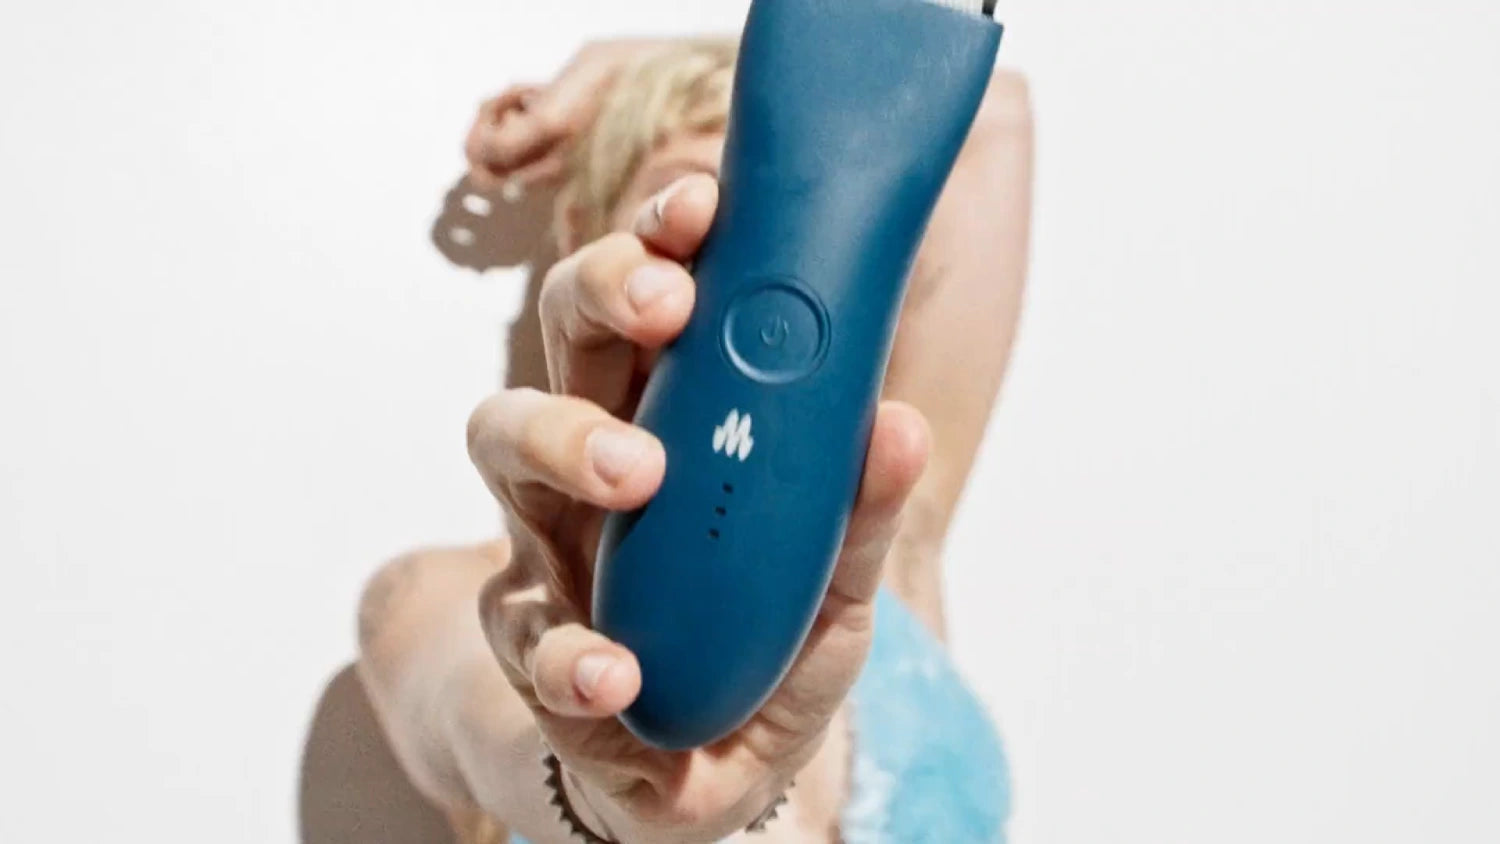 Person holding Meridian's Body Trimmer in Ocean color